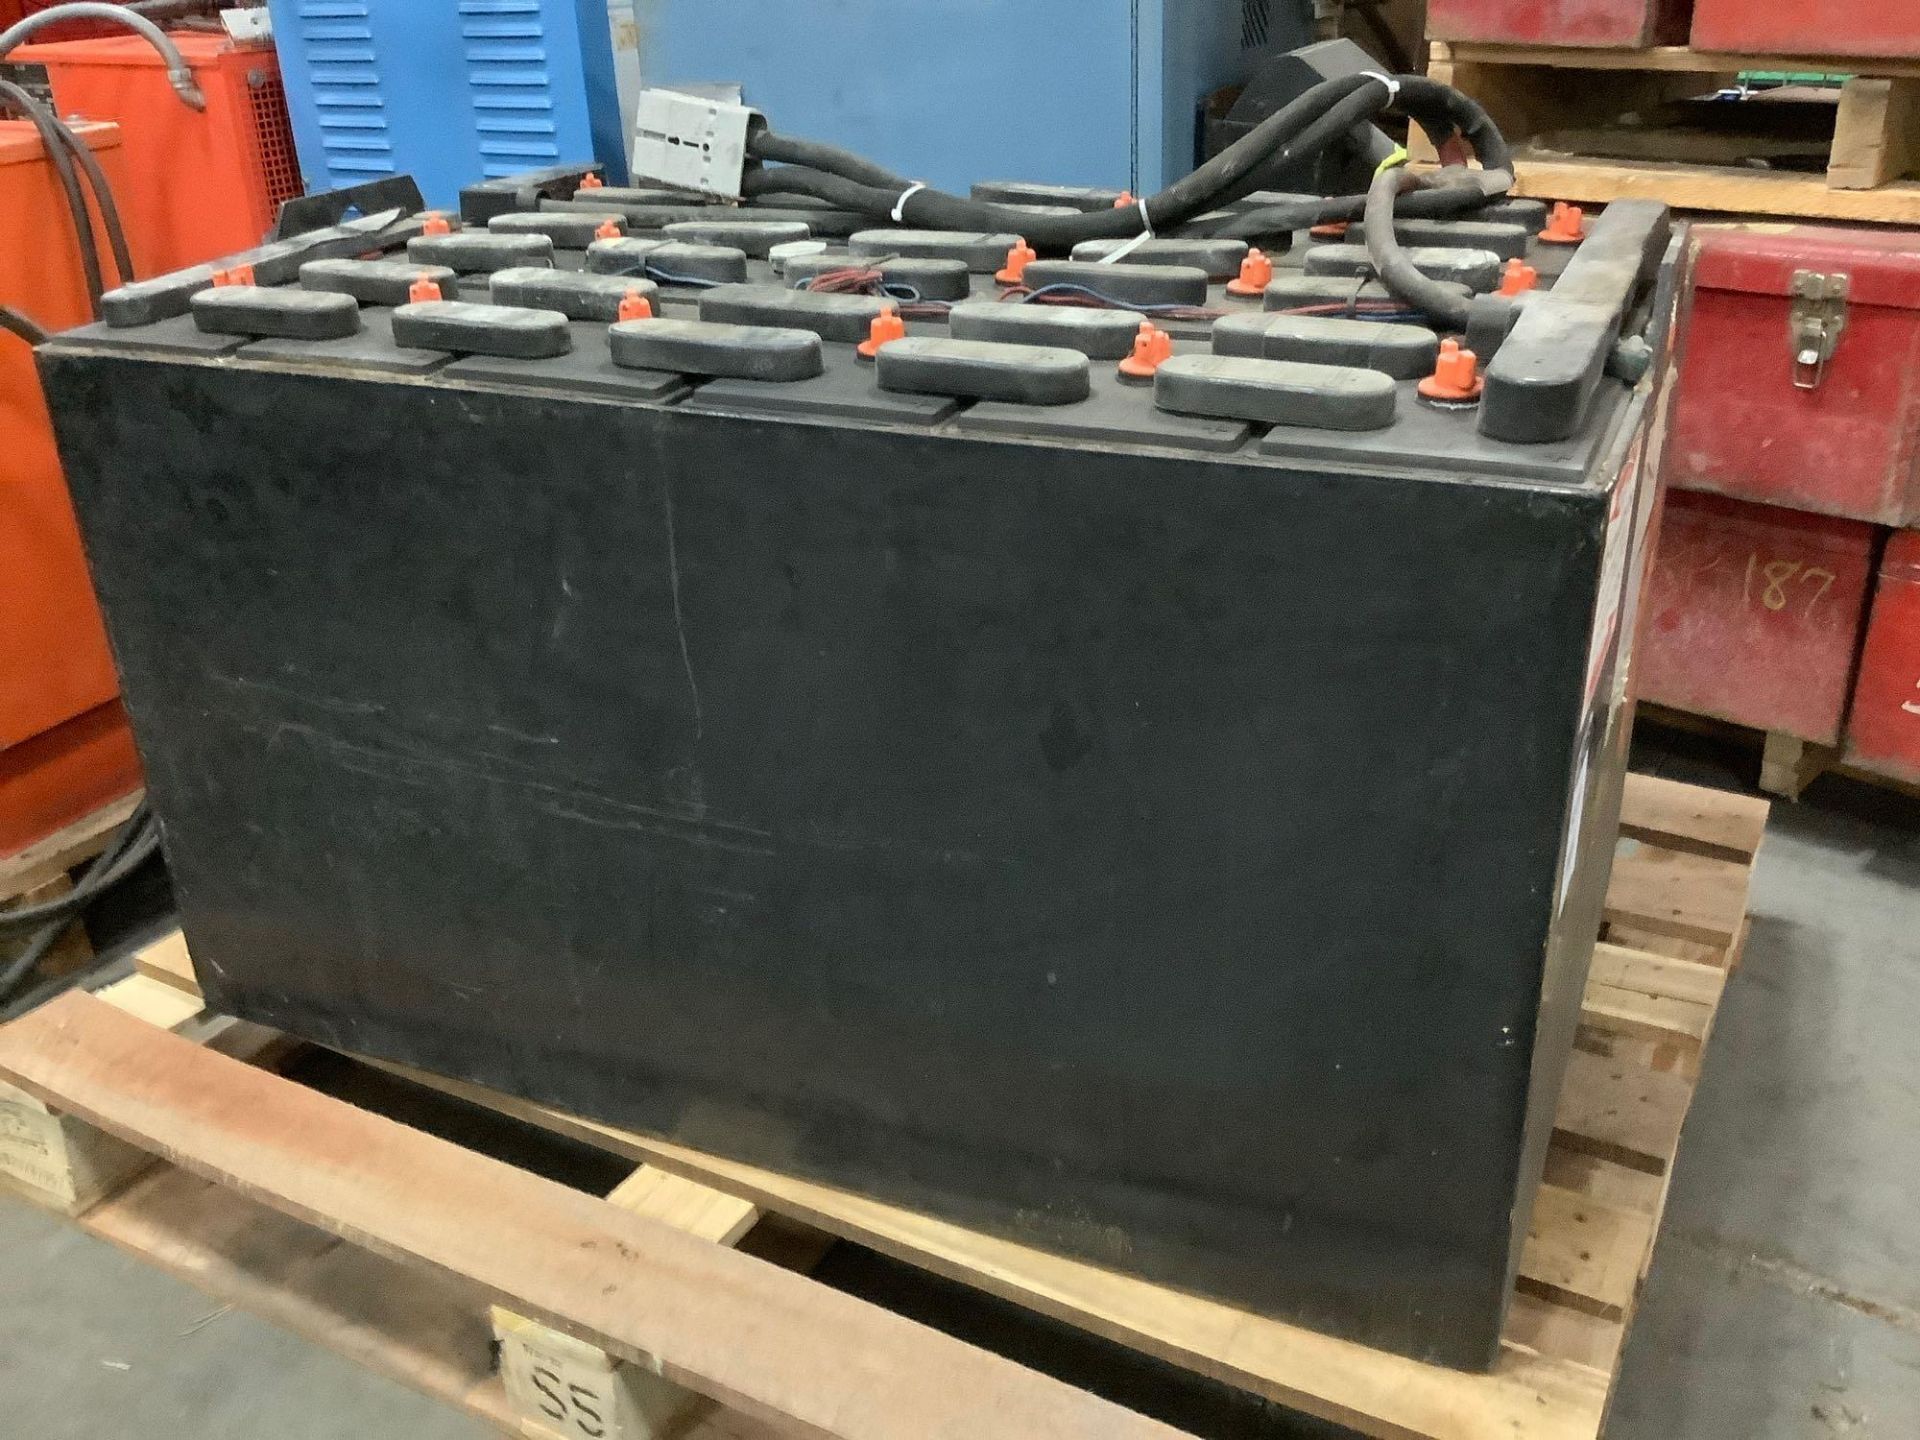 C&D TECHNOLOGIES C-LINE INDUSTRIAL FORKLIFT BATTERY CHARGER SERIAL #6H50936 APPROX 36 VOLTS - Image 3 of 3